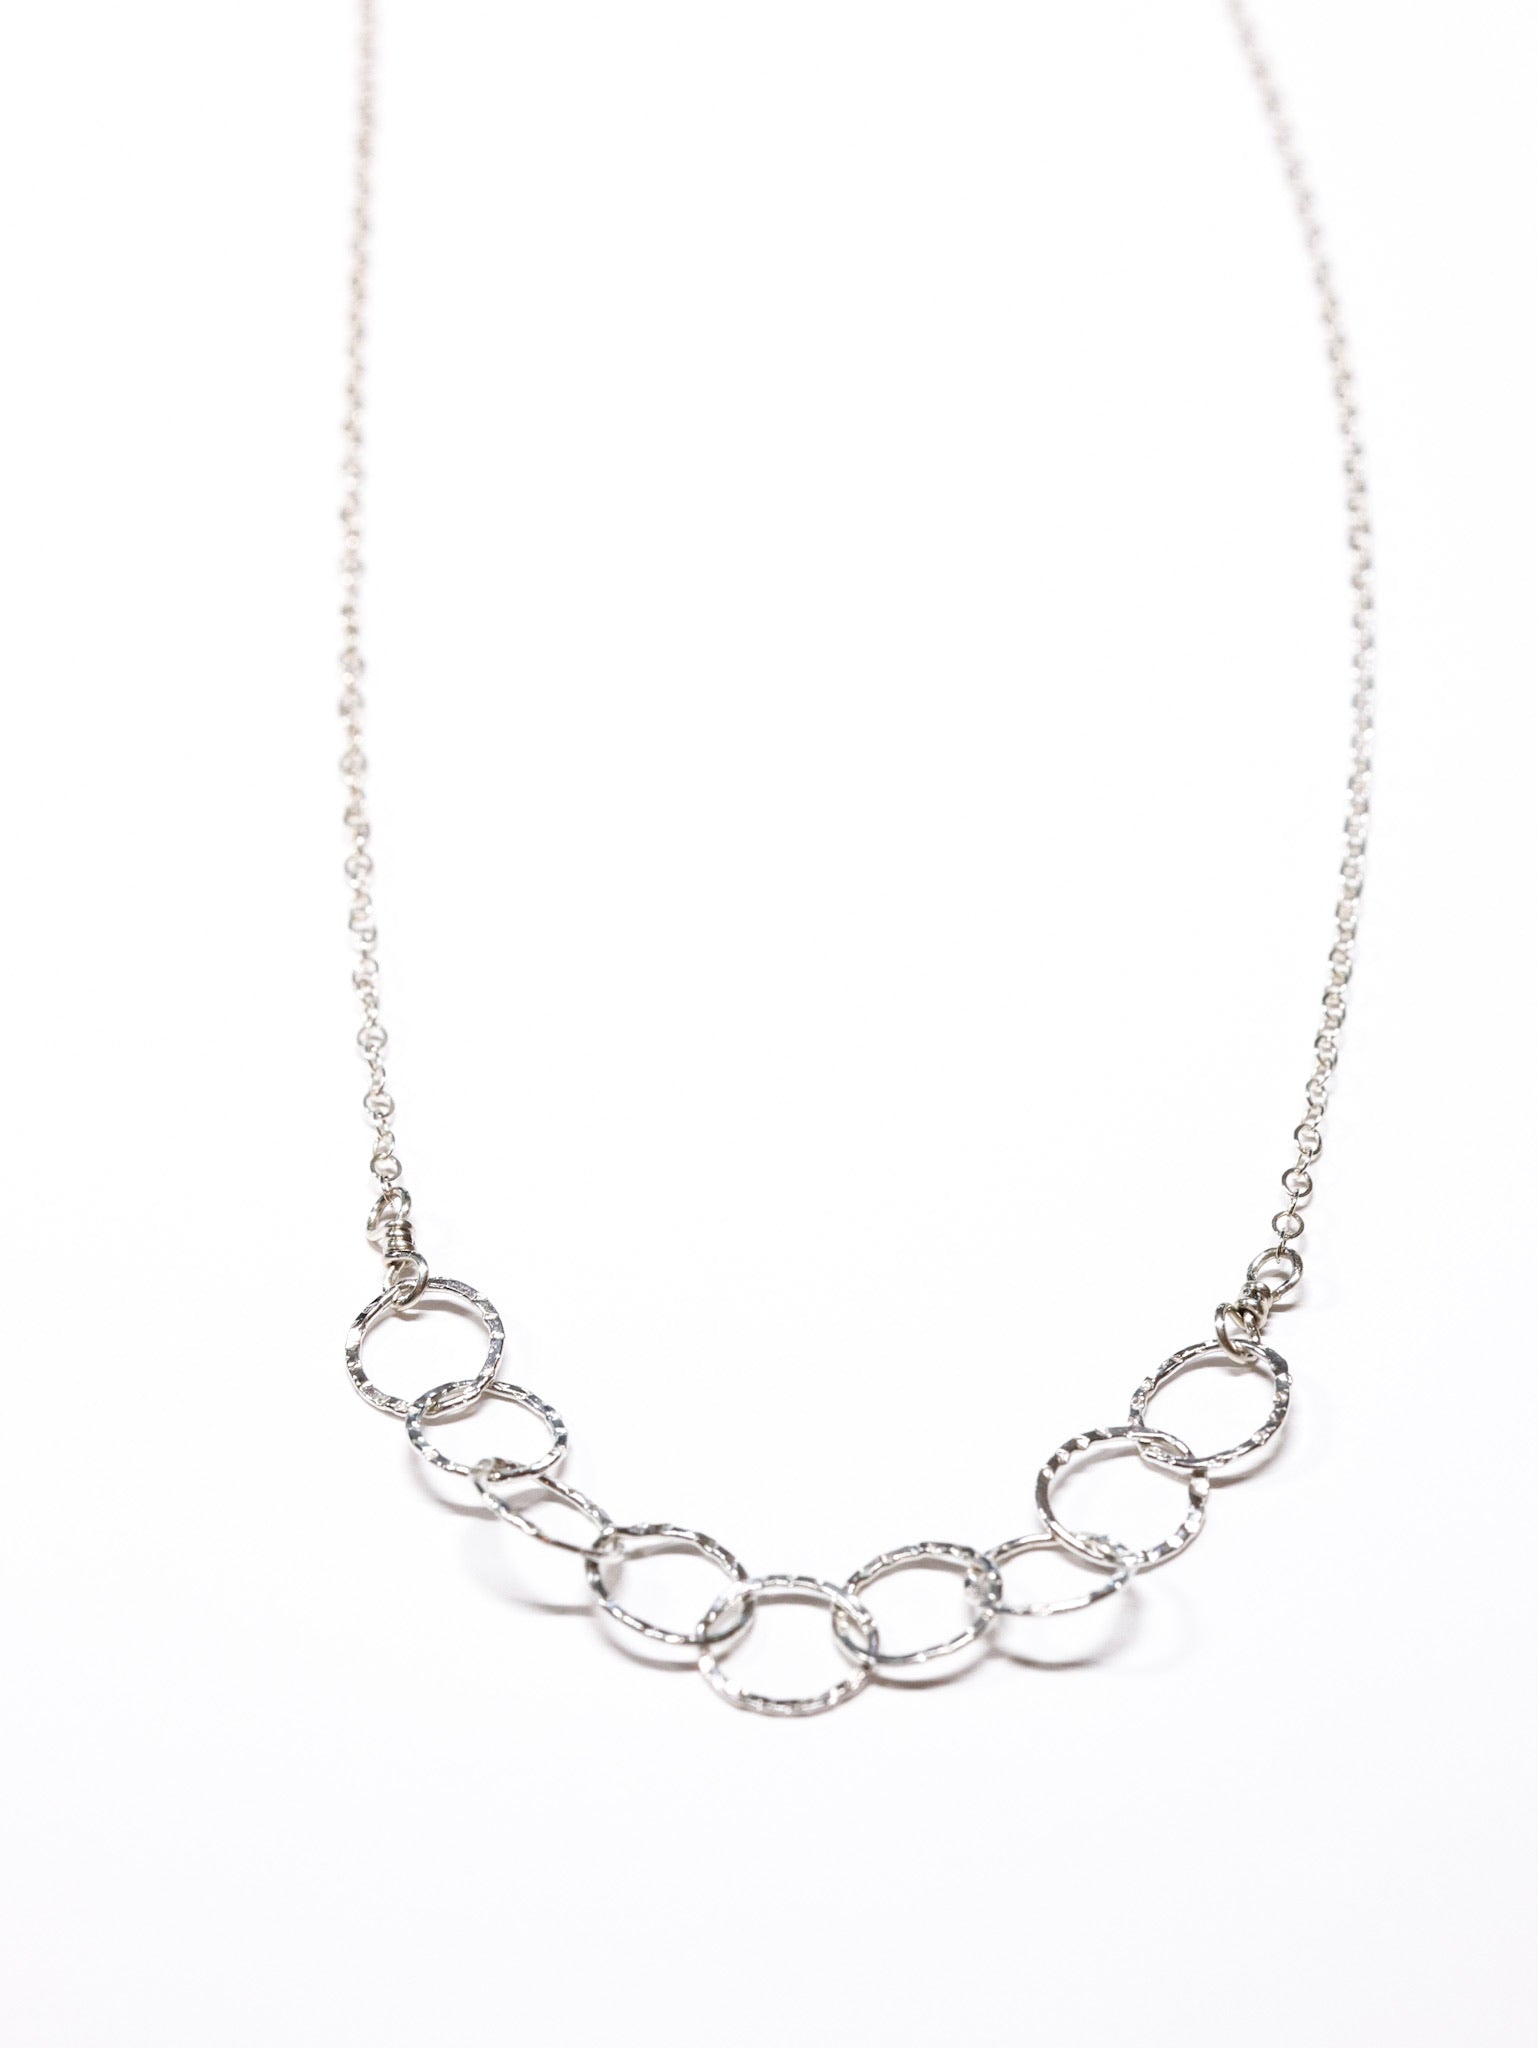 Smaller Circles Necklace -Sterling Silver